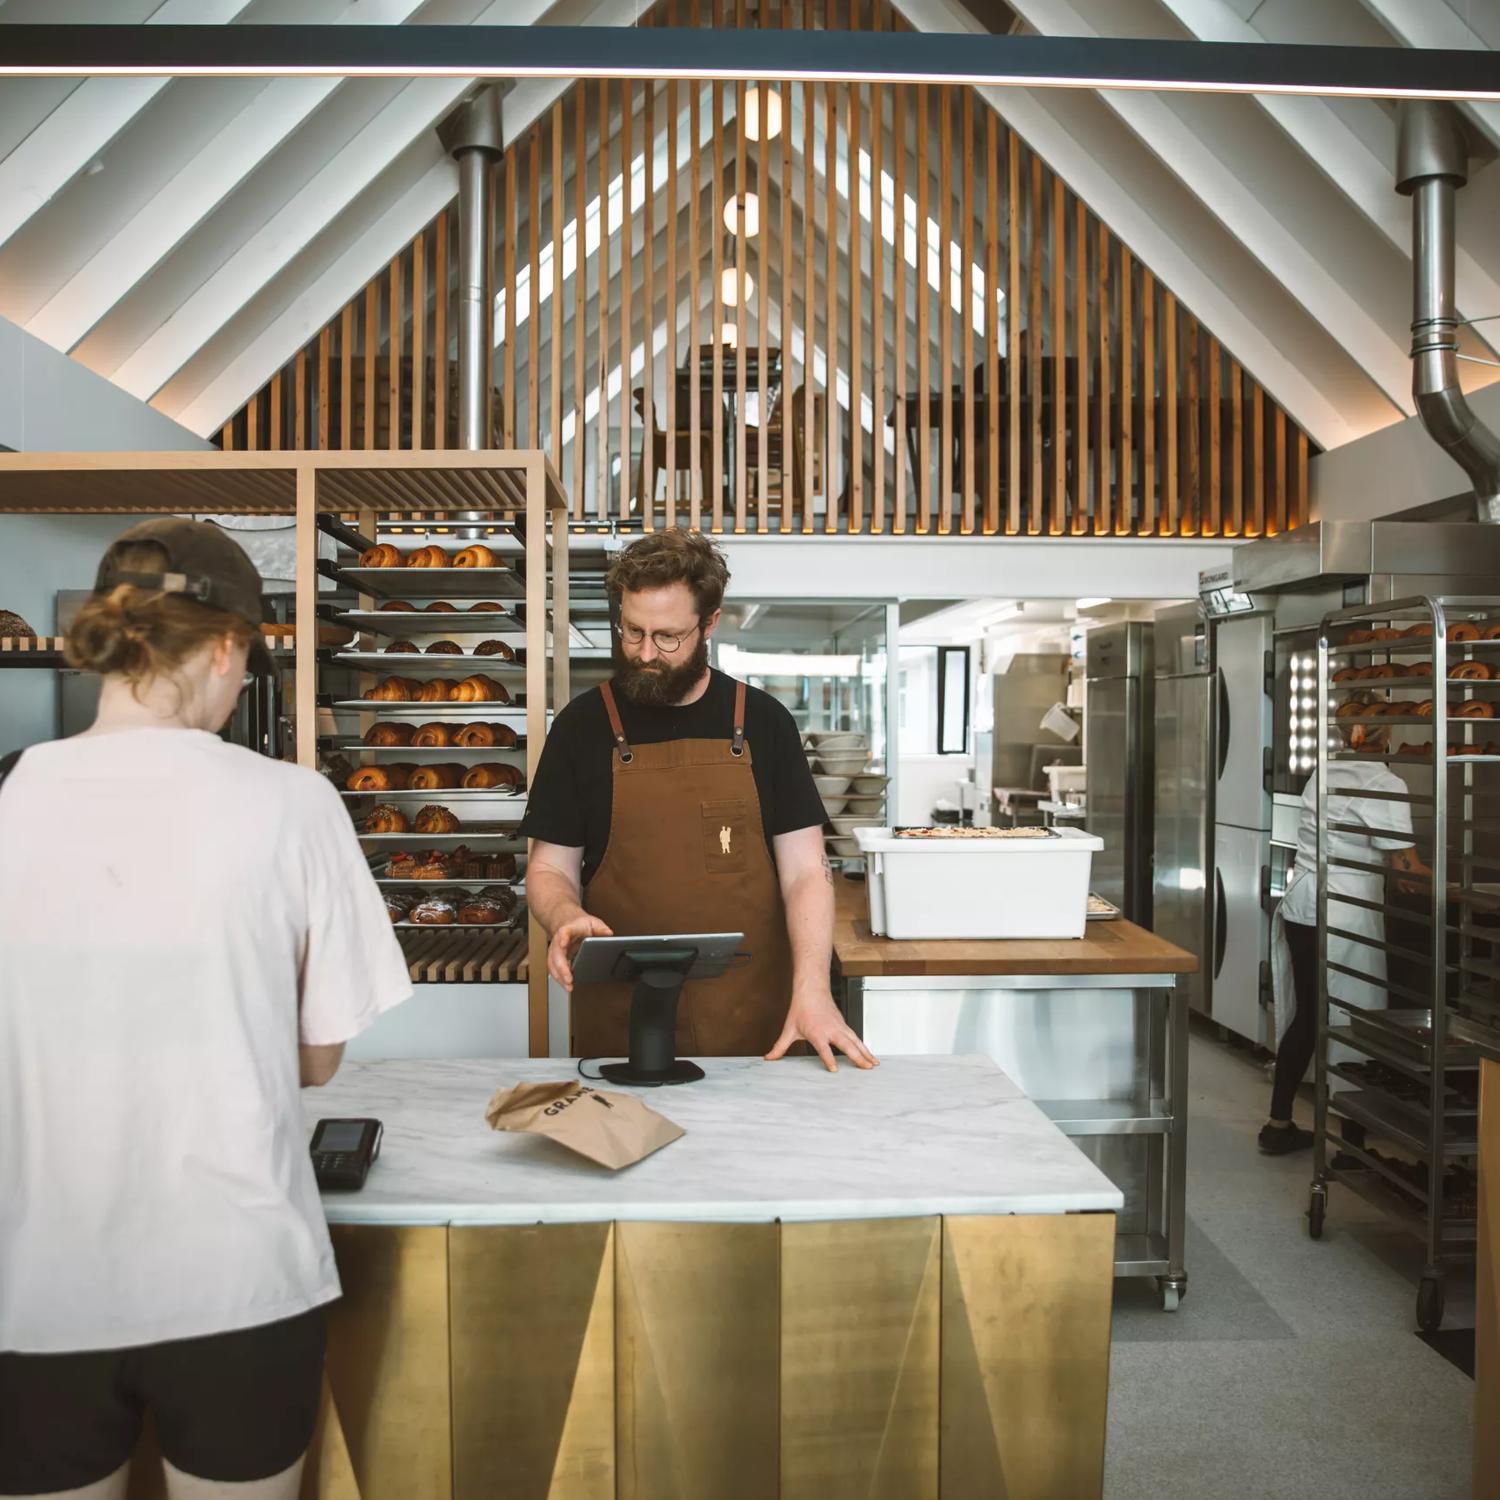 A person is paying for their order at the counter of Baker Gramercy, a bakery in Upper Hutt. The interior has a modern, minimalist feel with white walls and light wooden accents. 